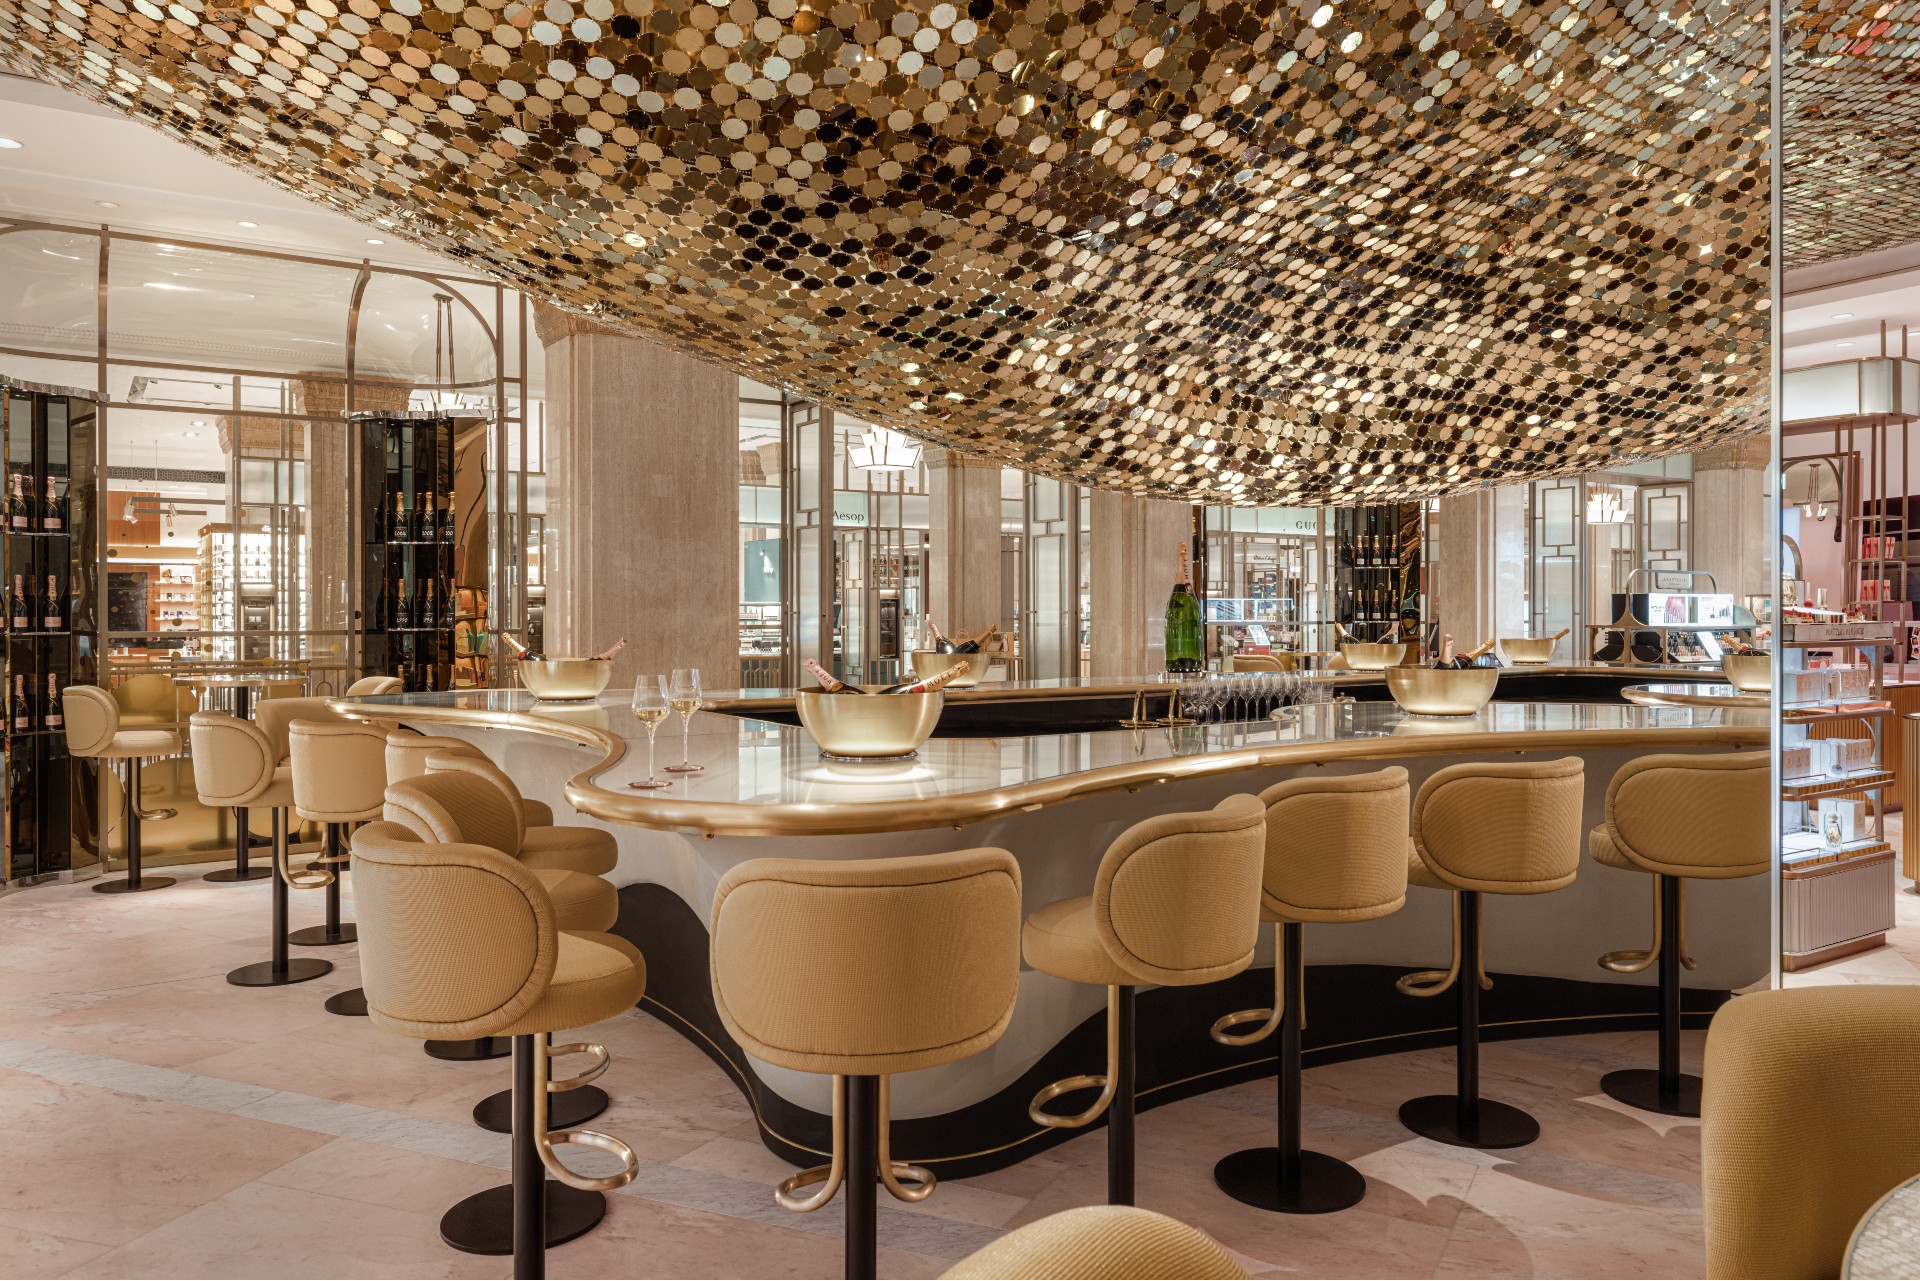 The Sybarite-designed Moët & Chandon Champagne Bar in Harrods